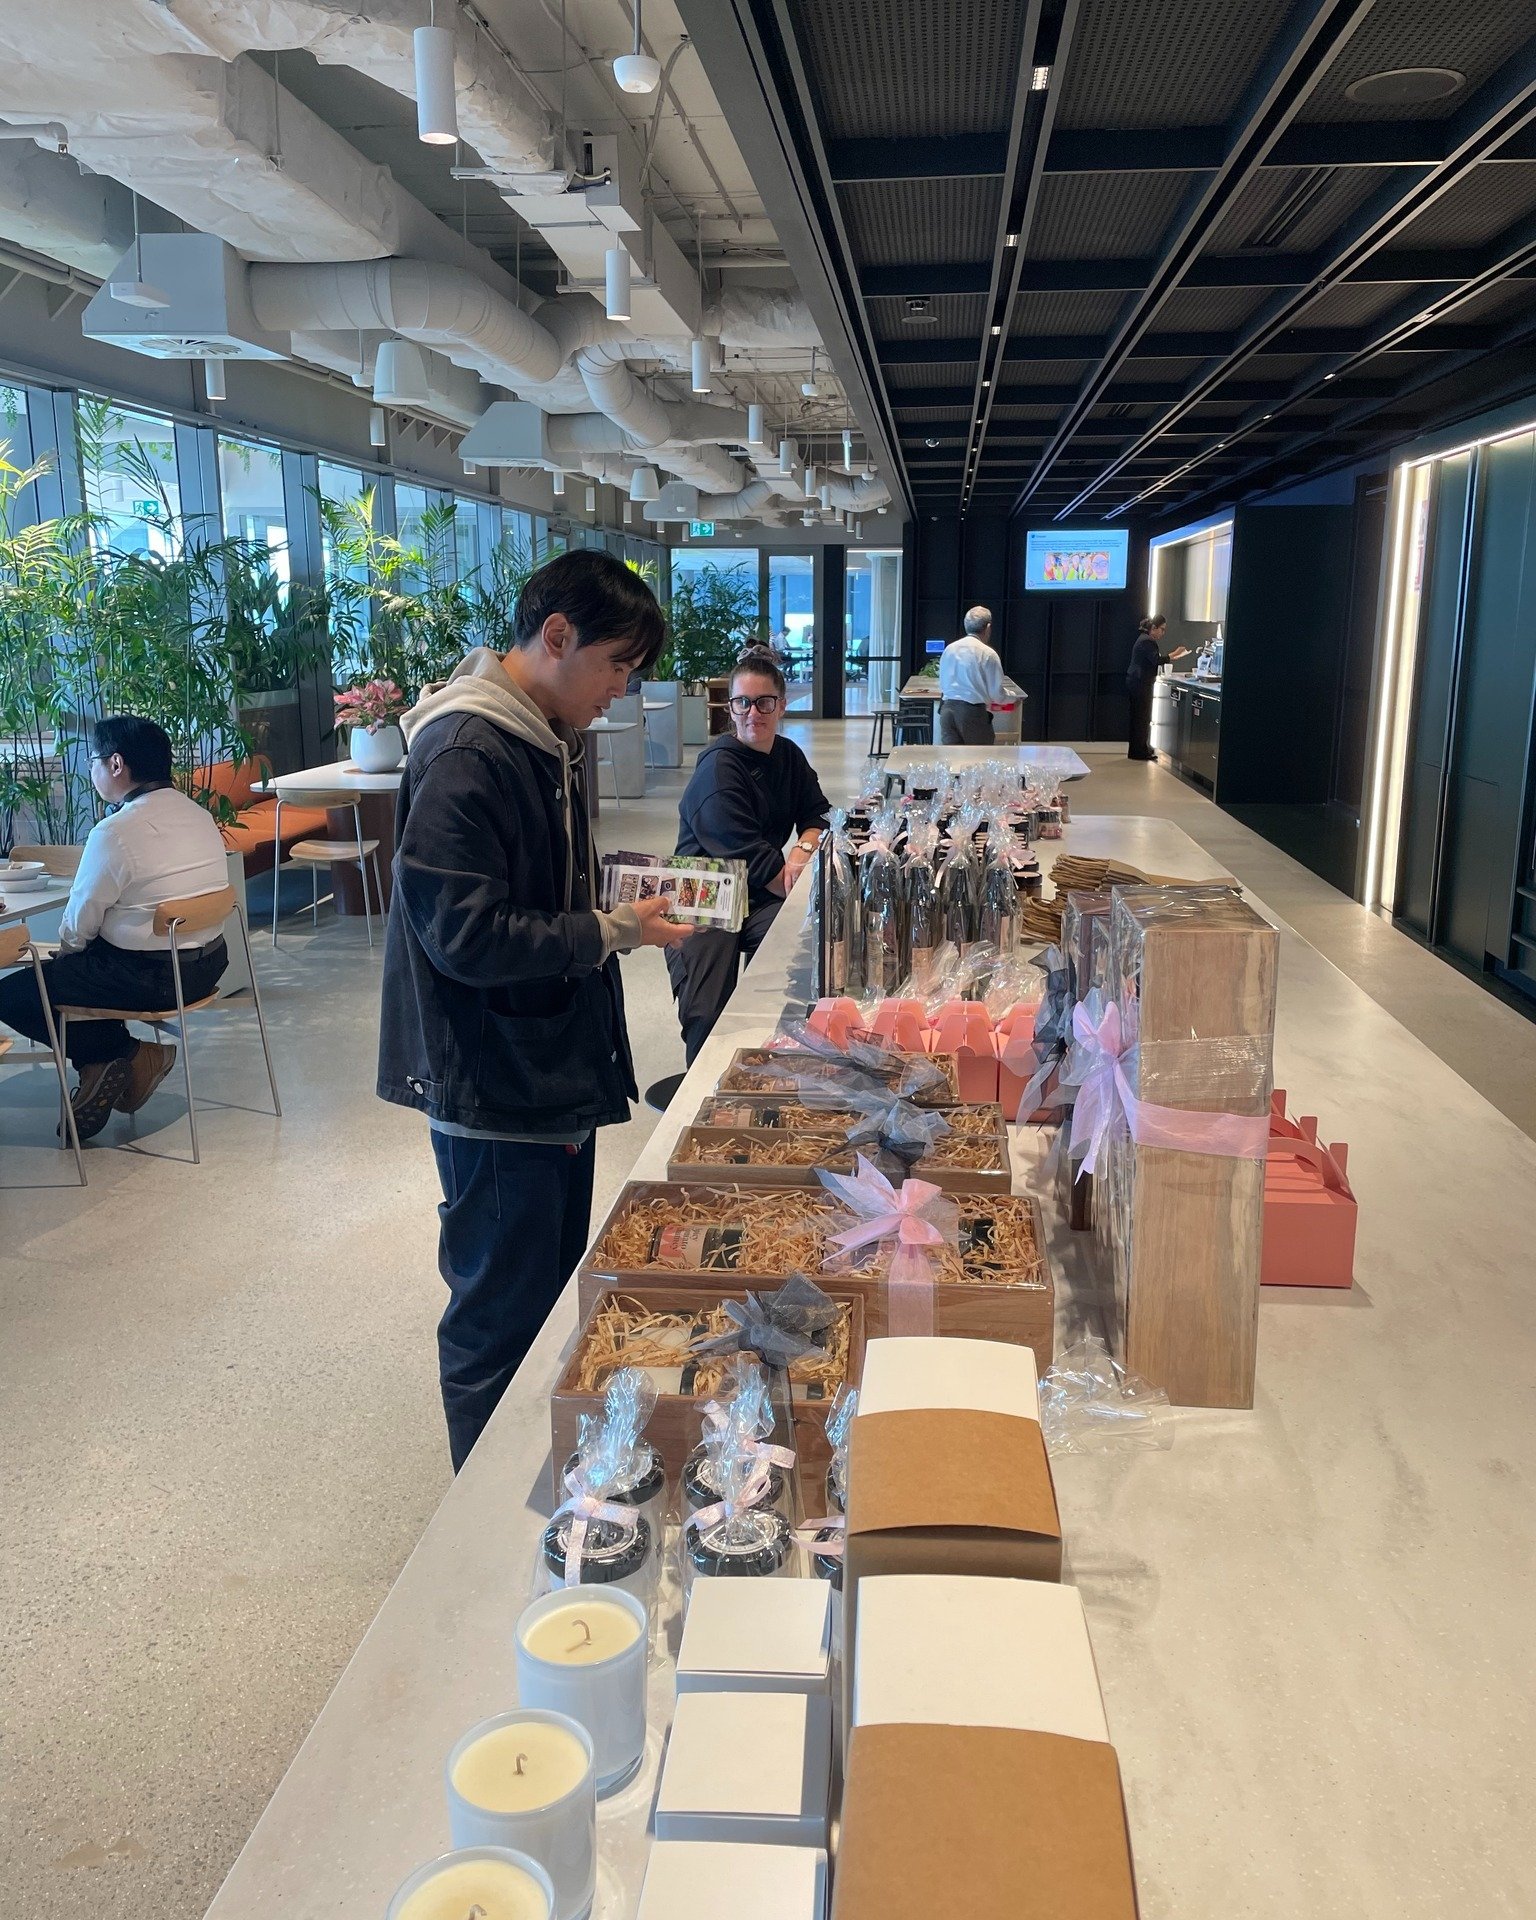 This week... @endeavourenergy played host to our farm pop-up stall in their Parramatta Head Office. Thank you Kevin and Jacinta, shown here setting up🫶

#SocialEnterprise #Charity #CanaCommunities